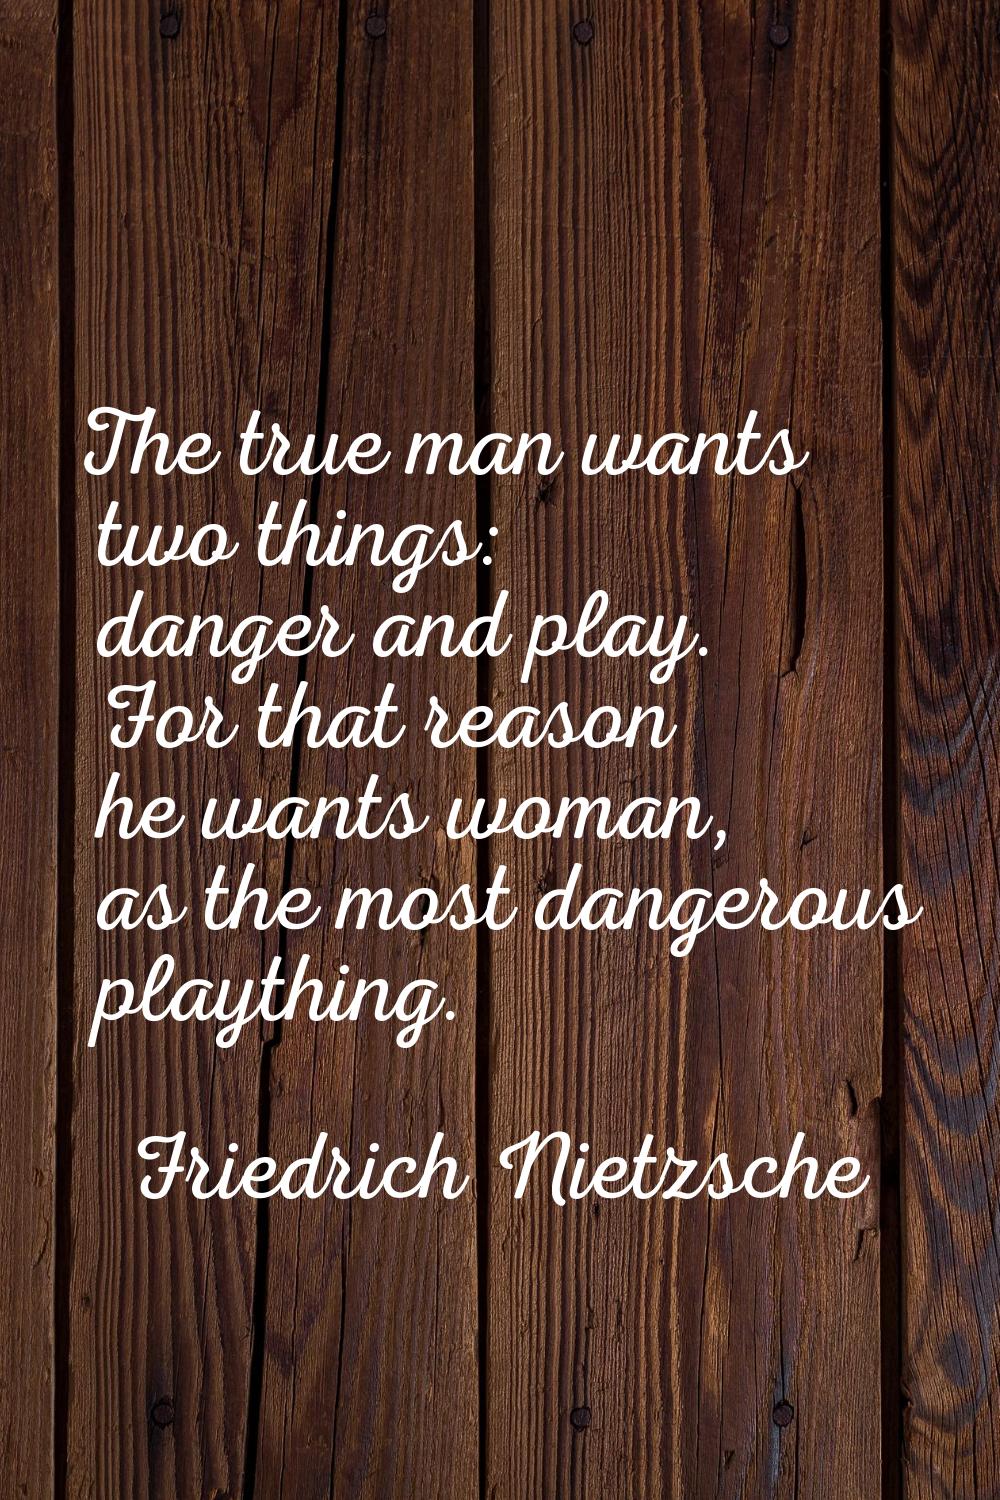 The true man wants two things: danger and play. For that reason he wants woman, as the most dangero